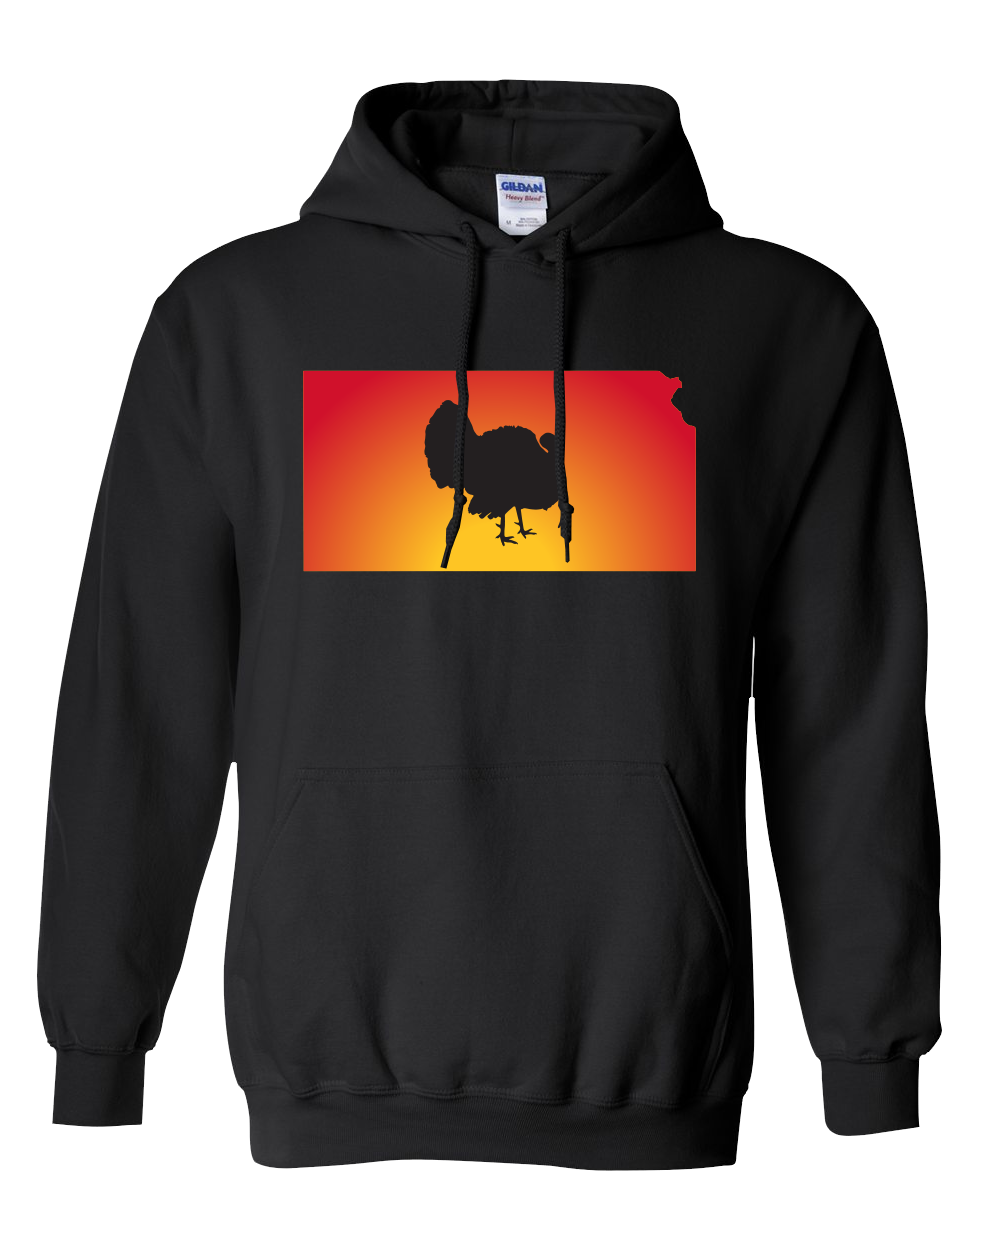 Pullover Hooded Sweatshirt Kansas Black Turkey Vibrant Design High Quality Tight Knit Ring Spun Low Maintenance Cotton Printed With The Newest Available Color Transfer Technology